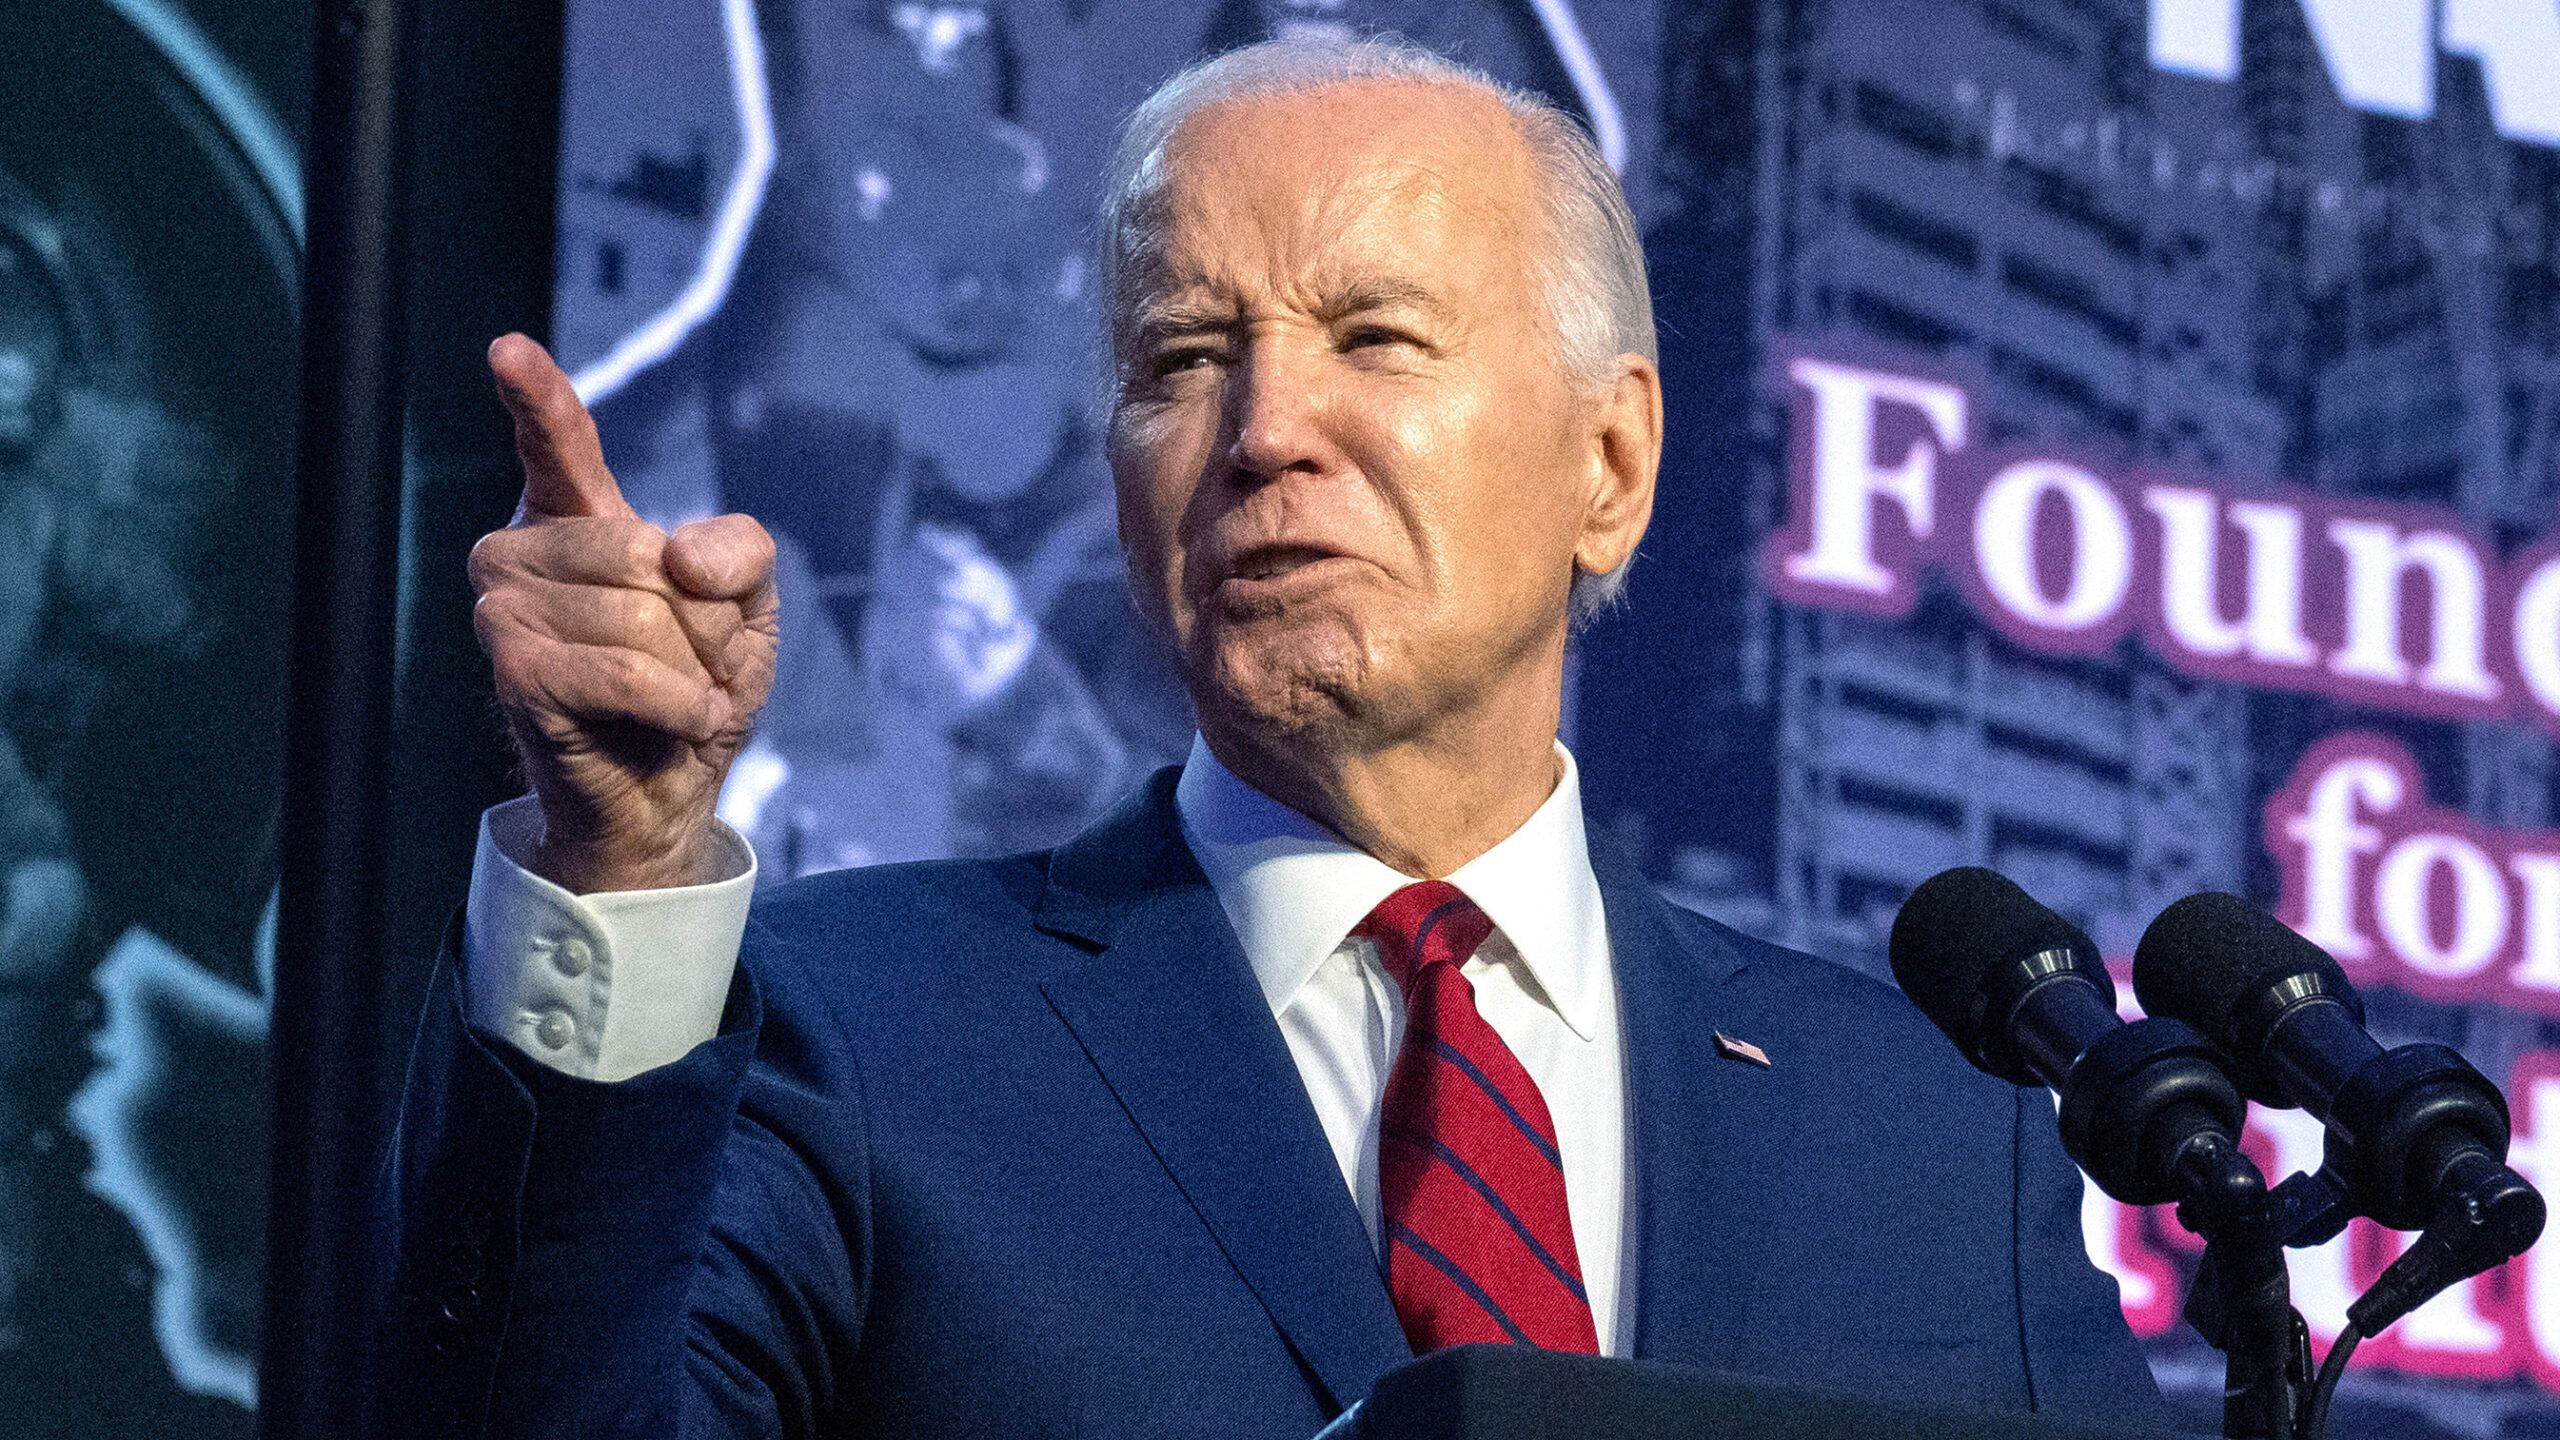 Biden stops weapons shipments to IDF to convey political message to Israel: Report